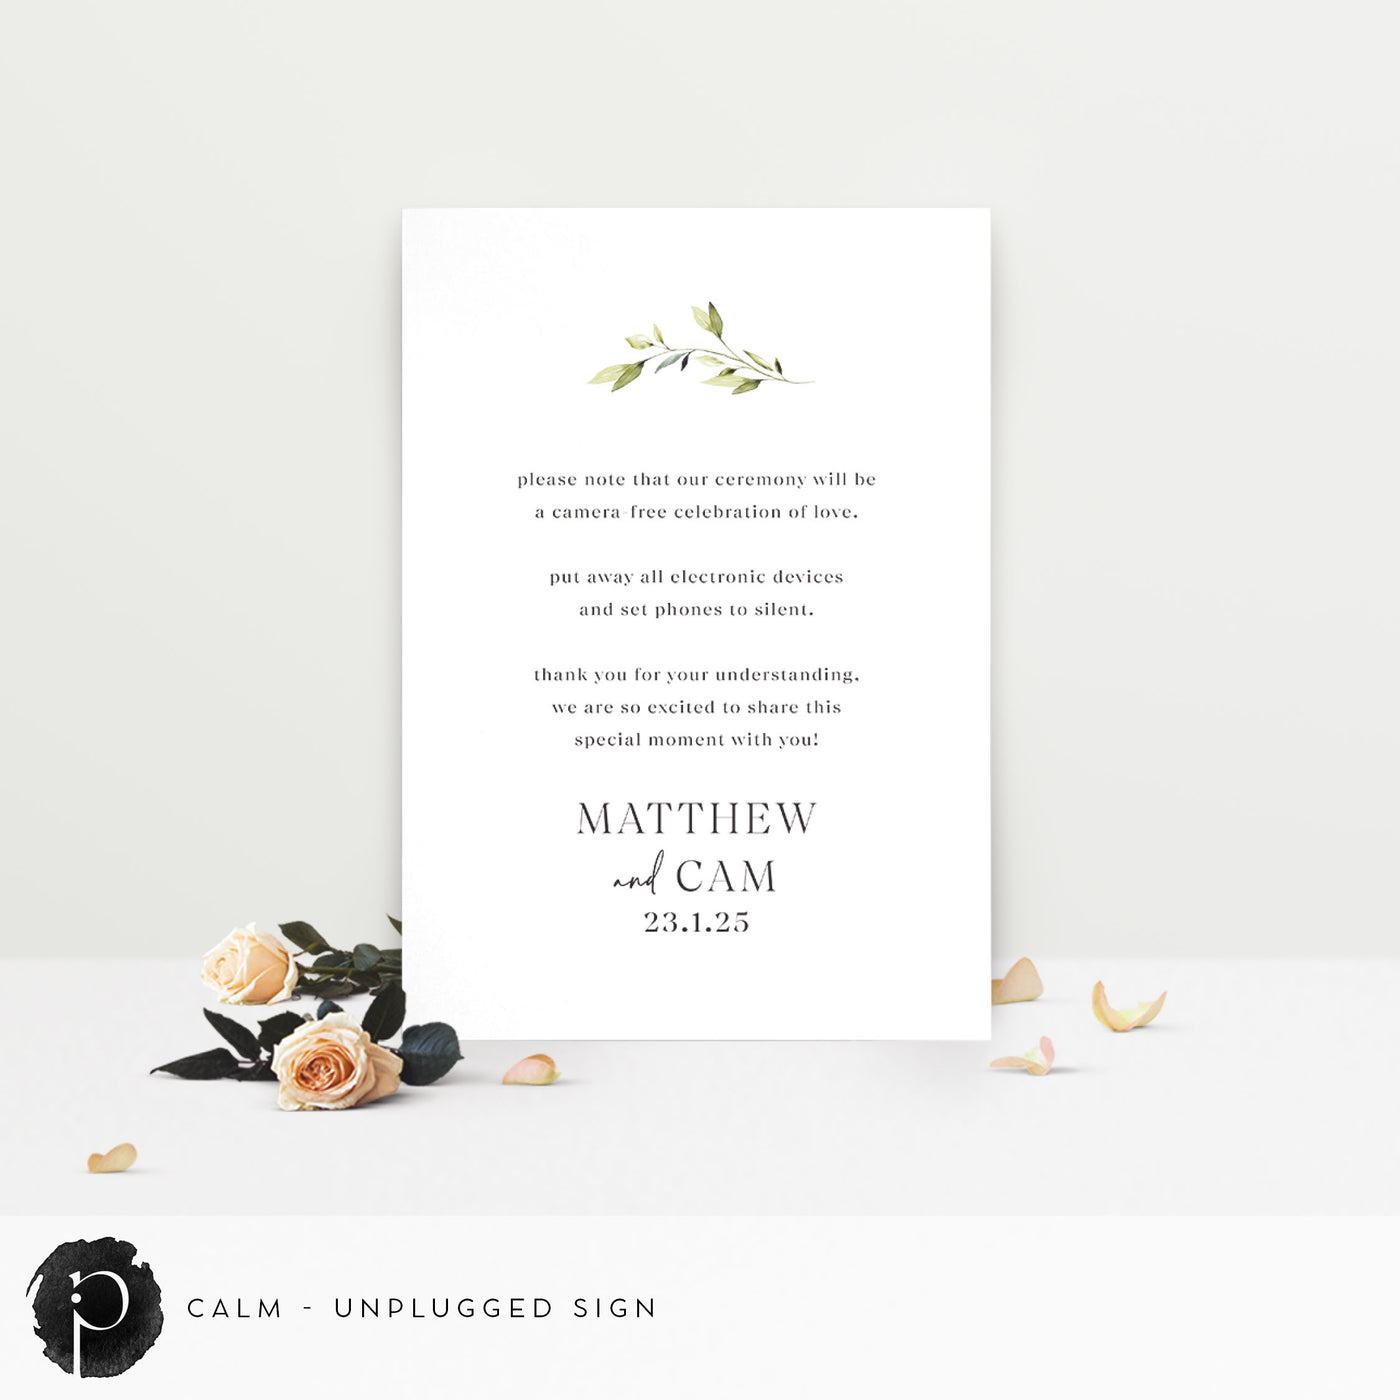 Calm - Unplugged Ceremony Sign